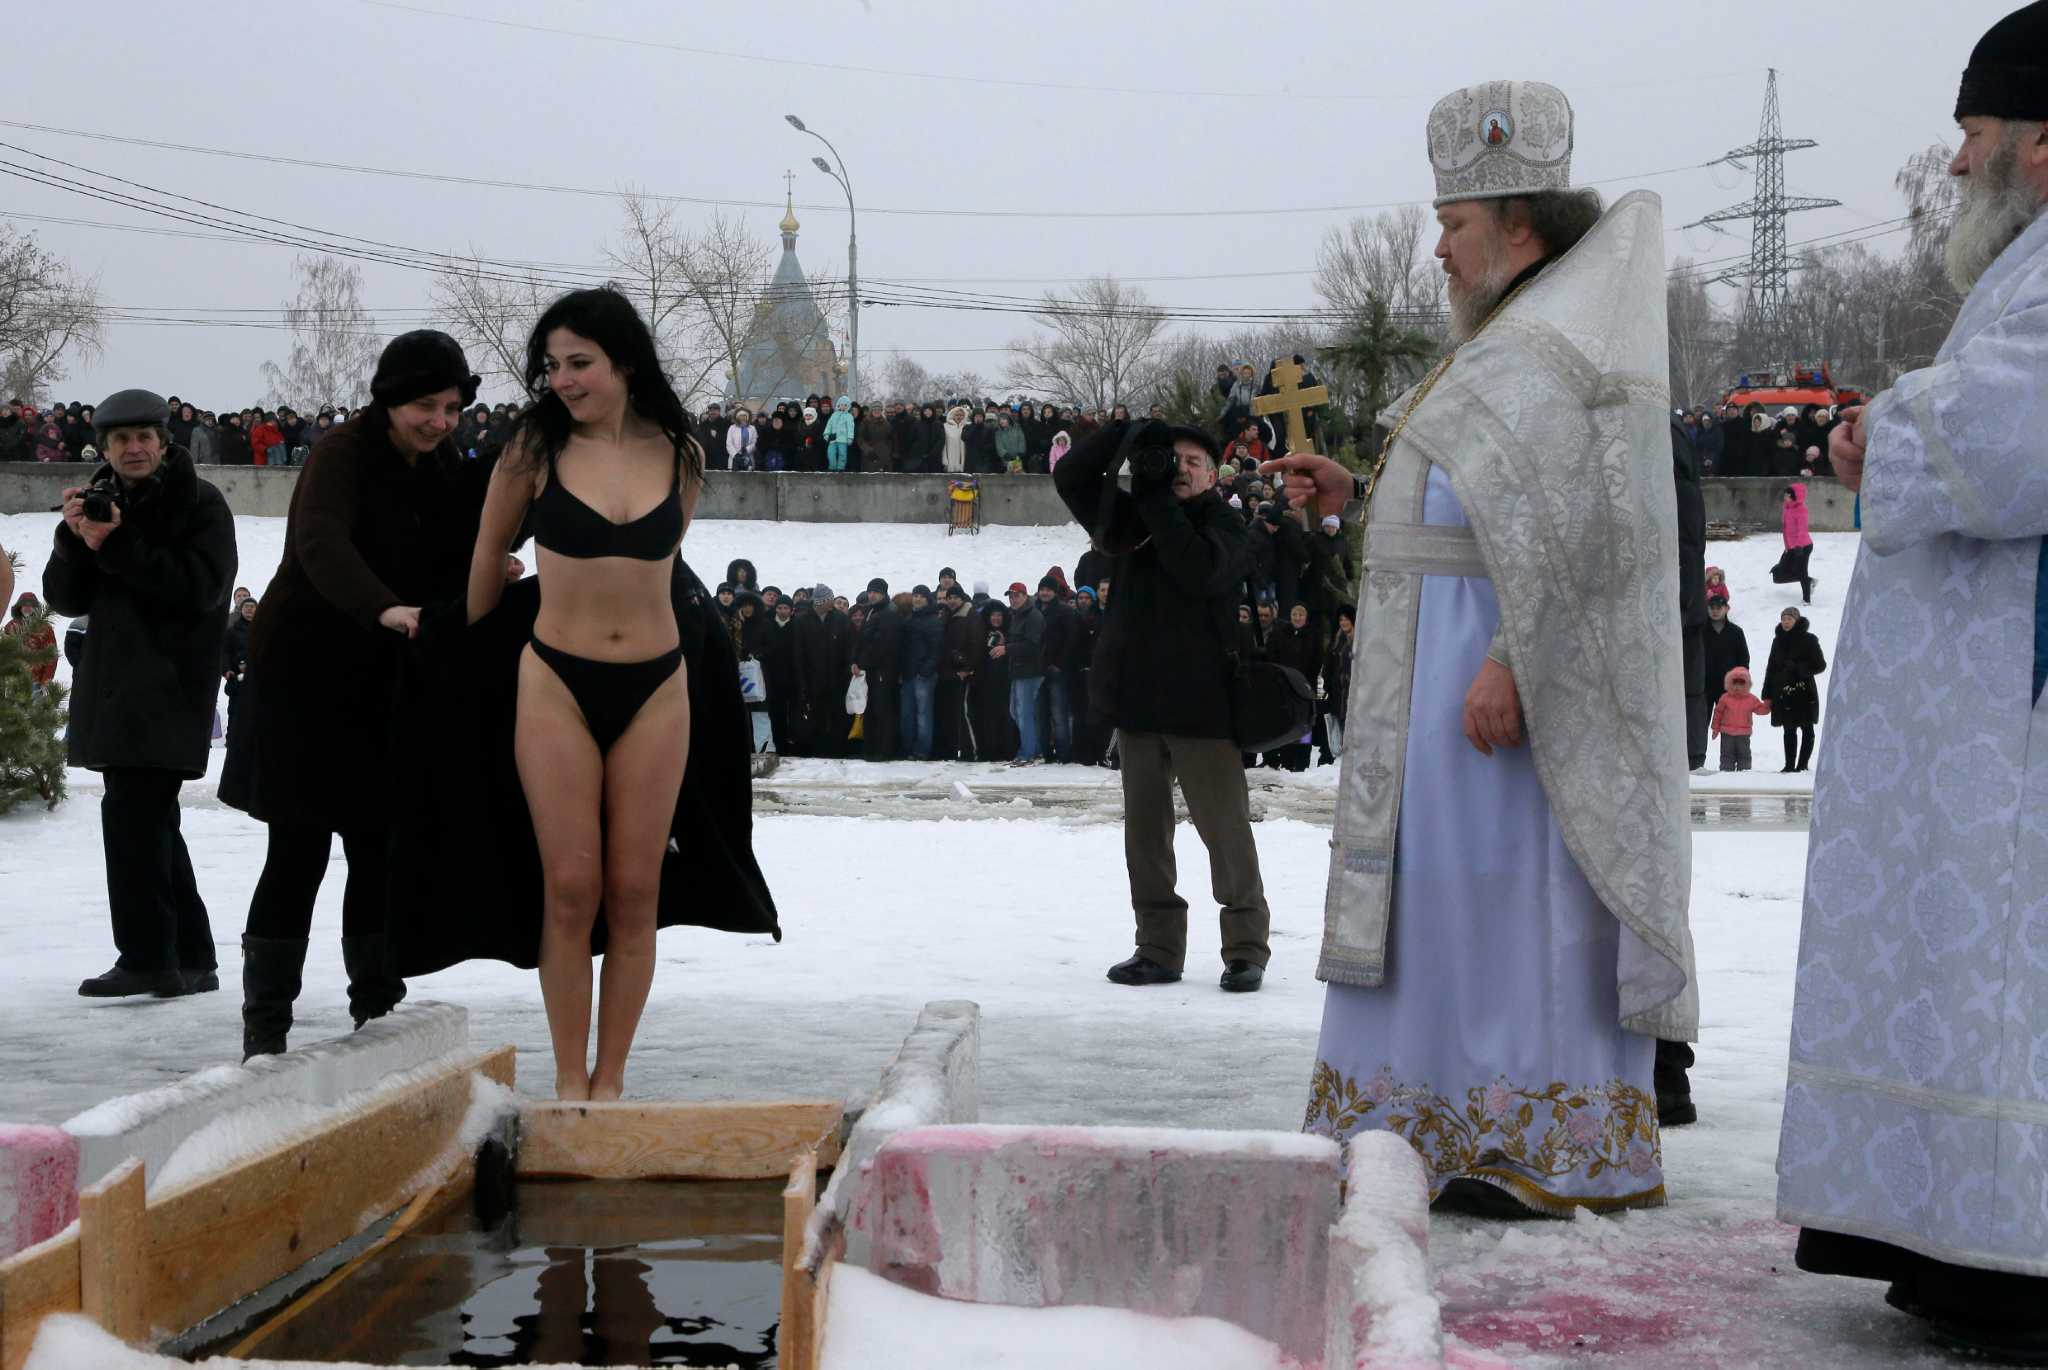 Russian Woman Jumps Into Ice Hole